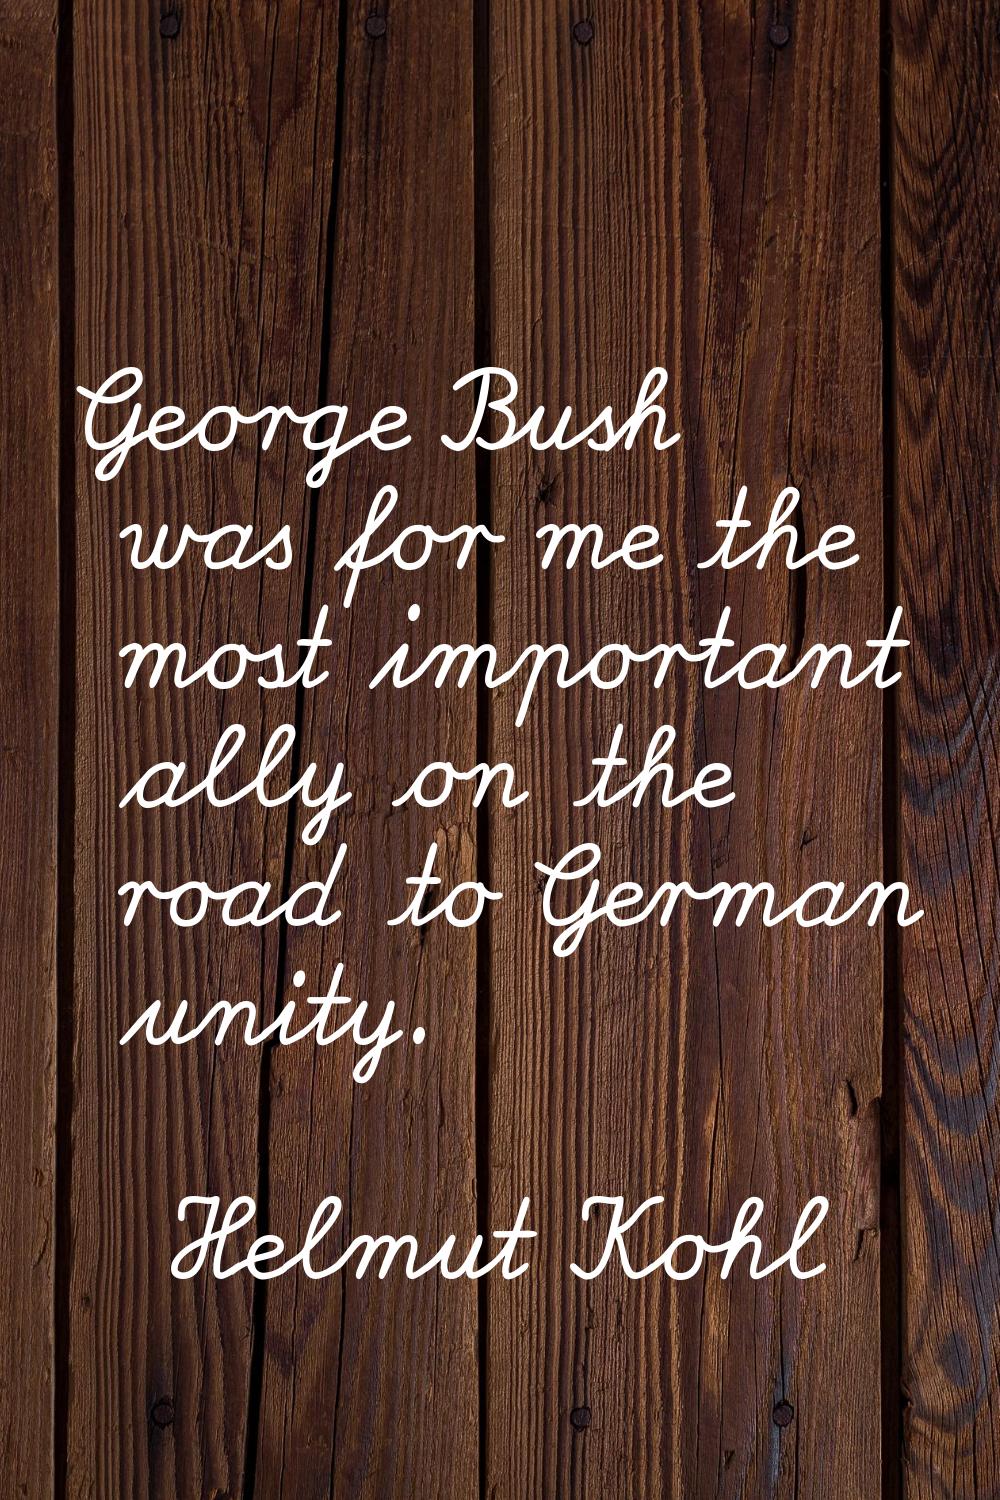 George Bush was for me the most important ally on the road to German unity.